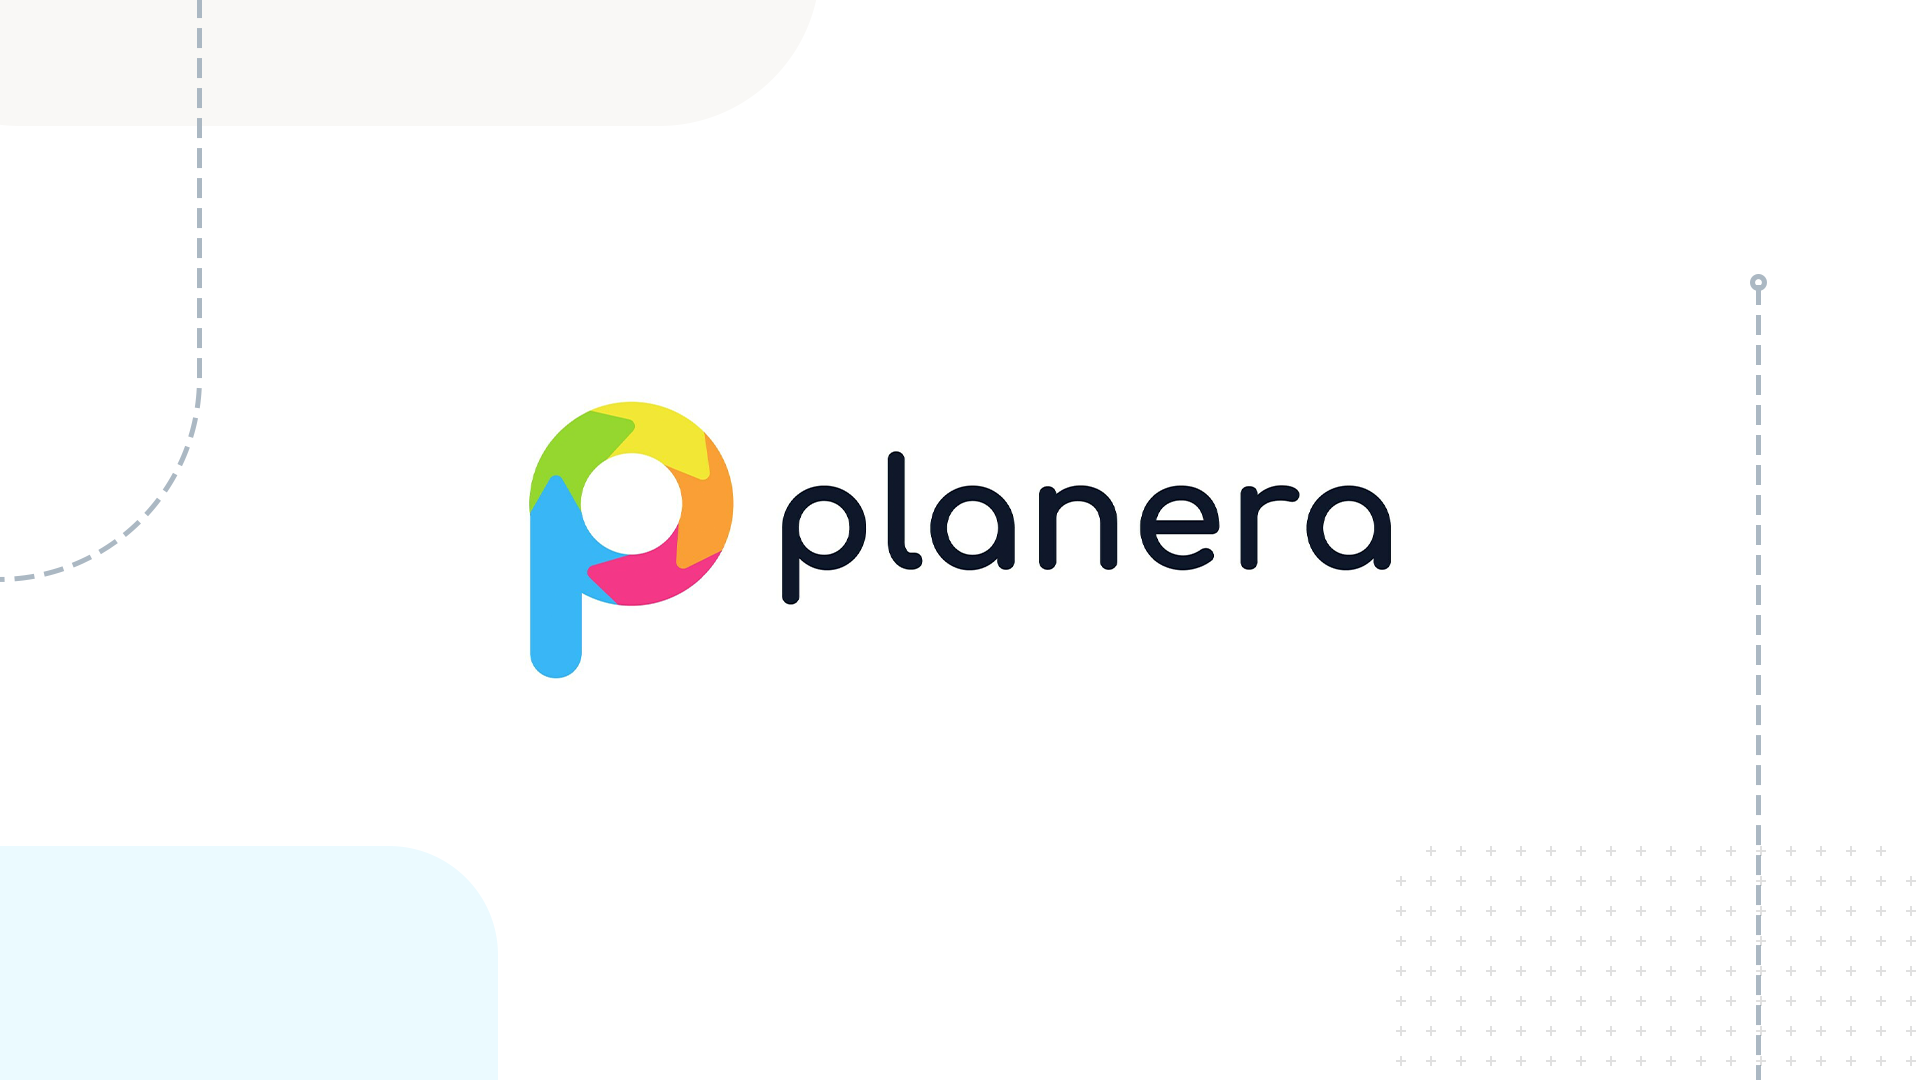 Why Construction Needs a Figma-like Facelift (And Why We Invested in Planera)